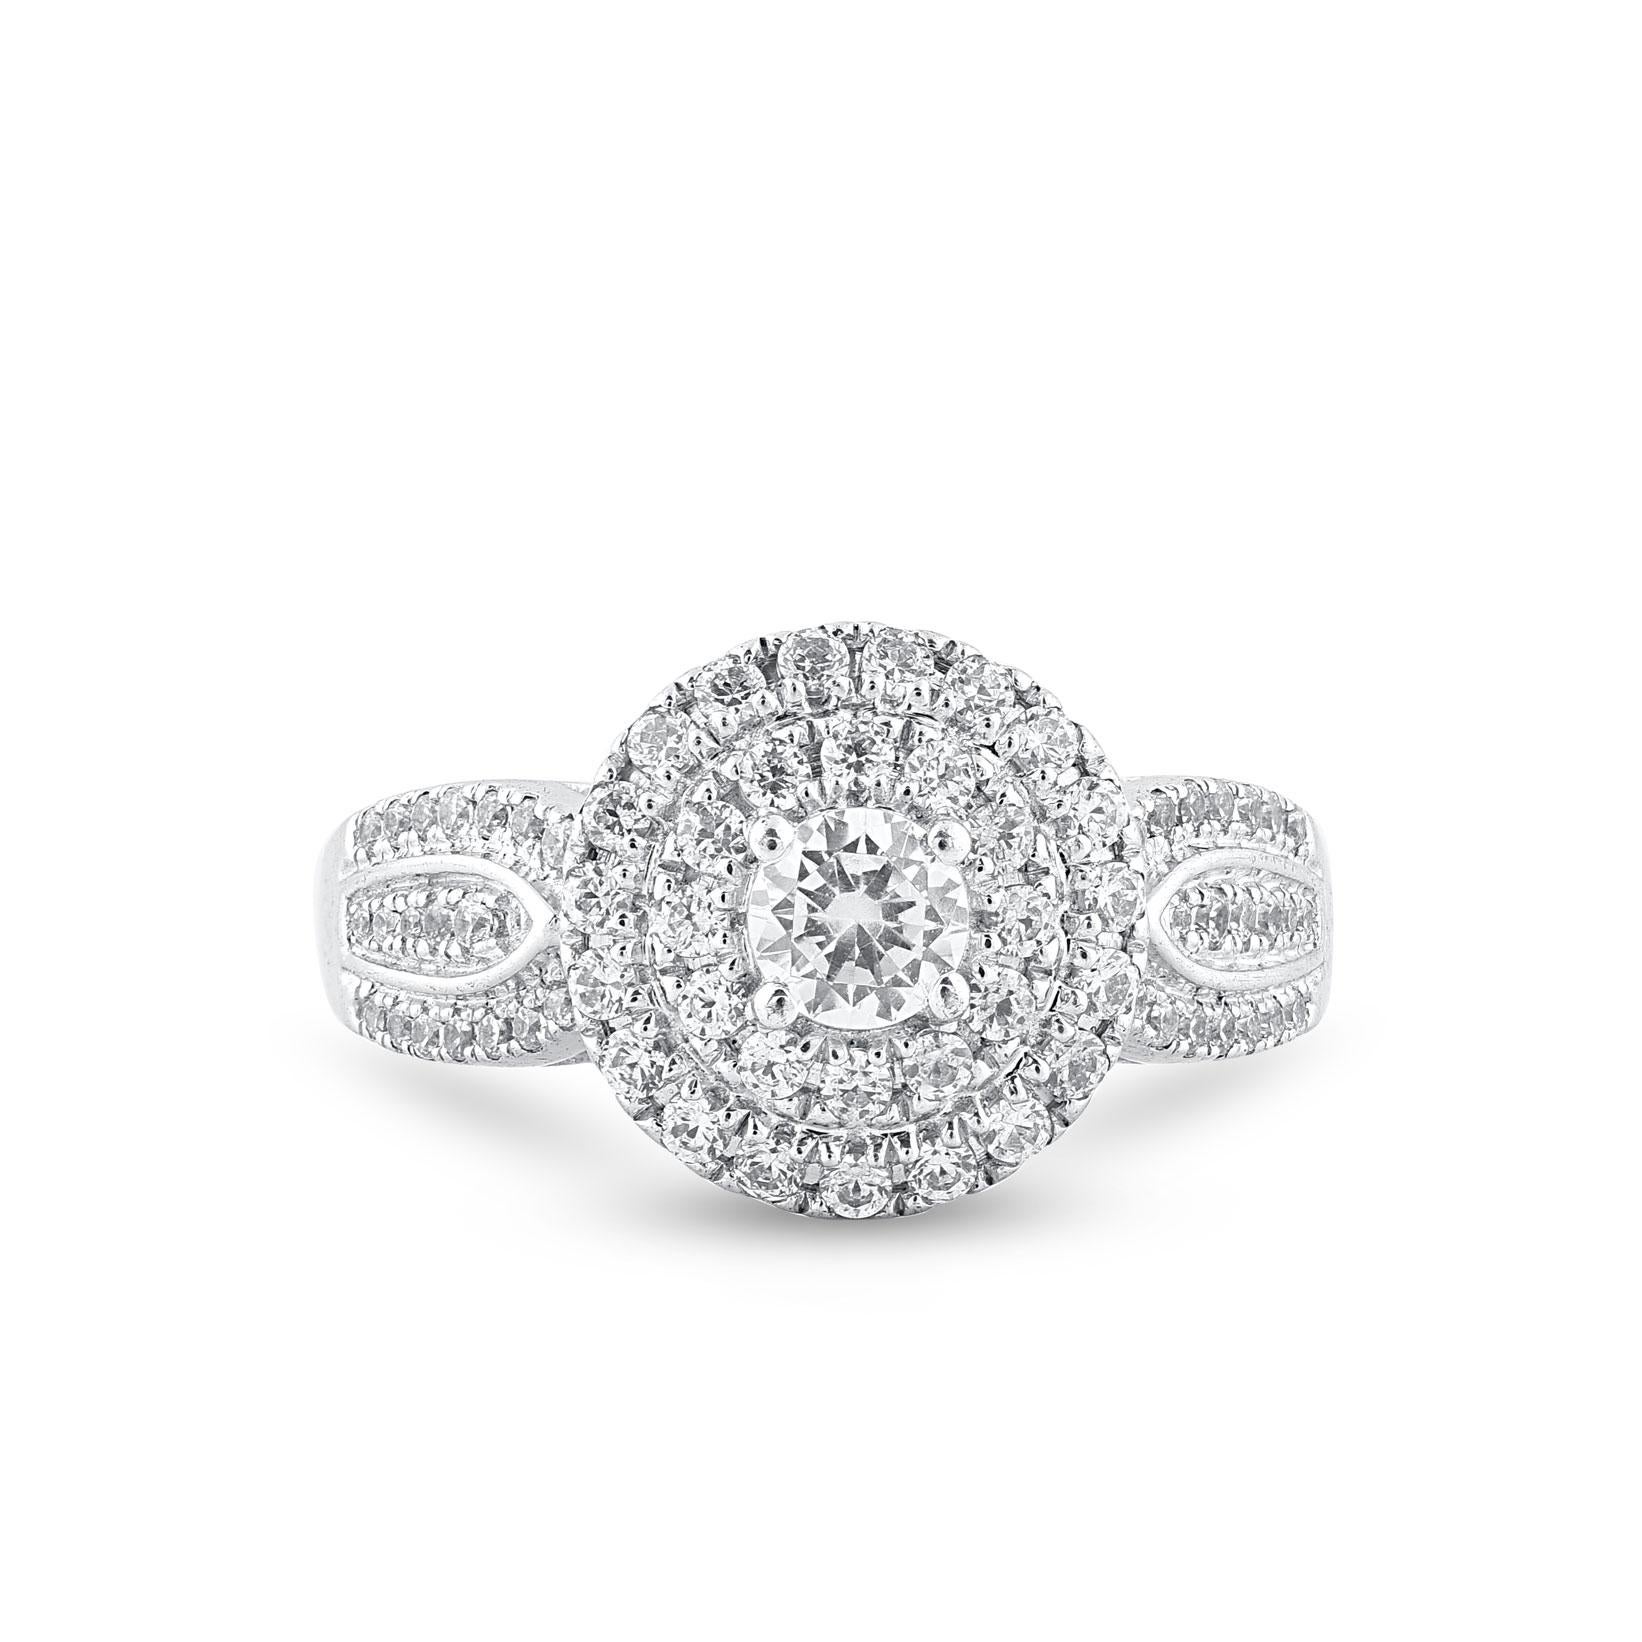 Win her heart with this classic and elegant diamond wedding ring. These diamond ring are studded with 82 single cut and brilliant cut round diamonds in prong and pave setting and crafted in 14kt white gold. The white diamonds are graded as H-I color